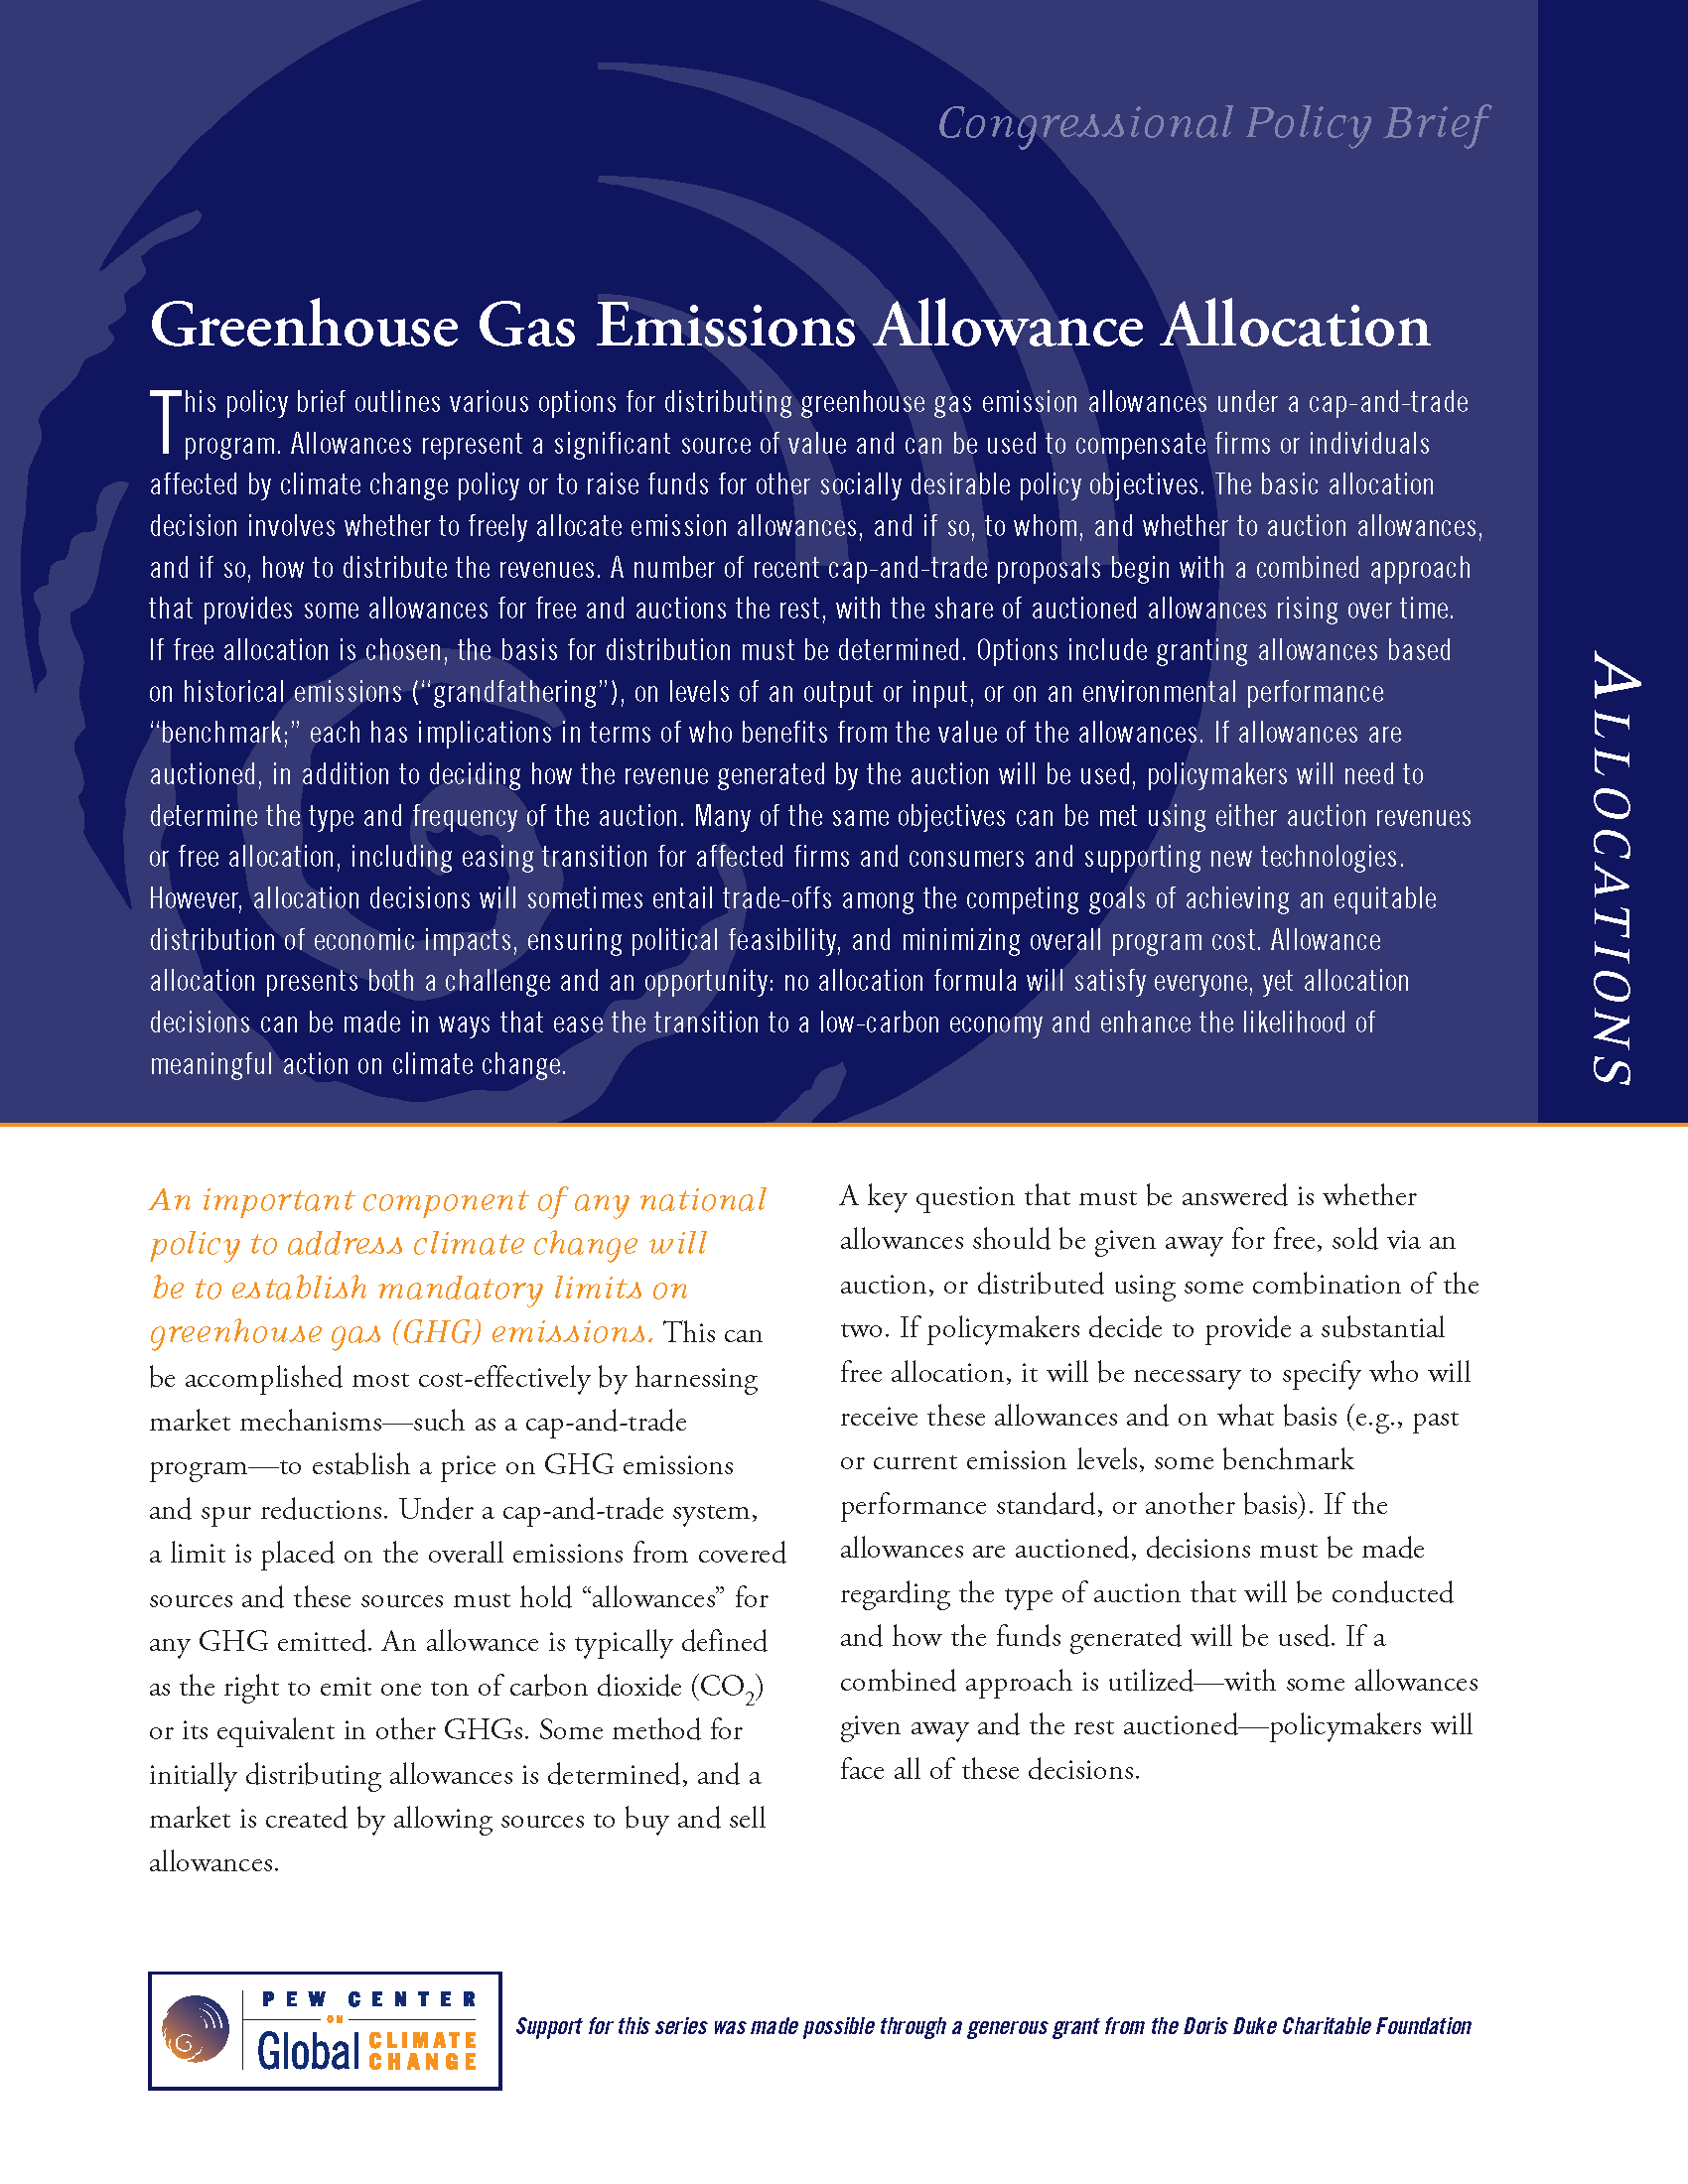 Greenhouse Gas Emissions Allowance Allocation Center for Climate and